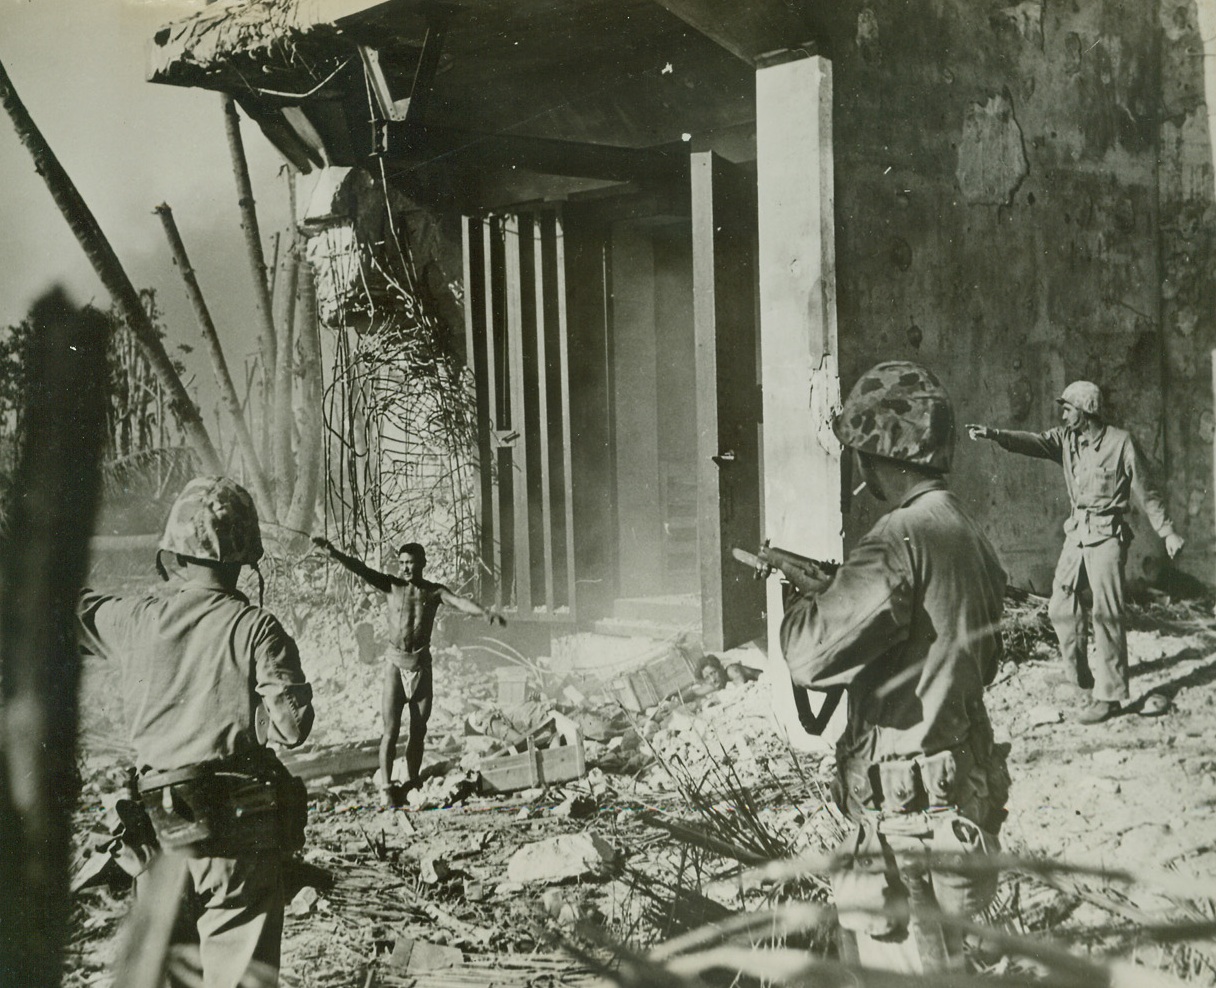 Bursts blockhouse Reveals 20 Japs, 2/16/1944. Namur Island – Thirty-six hours after Namur Island on Kwajalein Atoll in the Marshalls was “secured”, a supposedly silenced Jap block house blew up, bursting a steel door.  A Jap soldier stumbled through and three more were found inside.  There had been 20 Japs in the block house before the explosion.  Here suspicious Marines direct an uninjured Jap, clad only in a loin cloth, away from the building, as another crawls out from wreckage beneath the door.  A third Jap lies dead between them. Credit (U.S. Marine Corps photo from ACME);